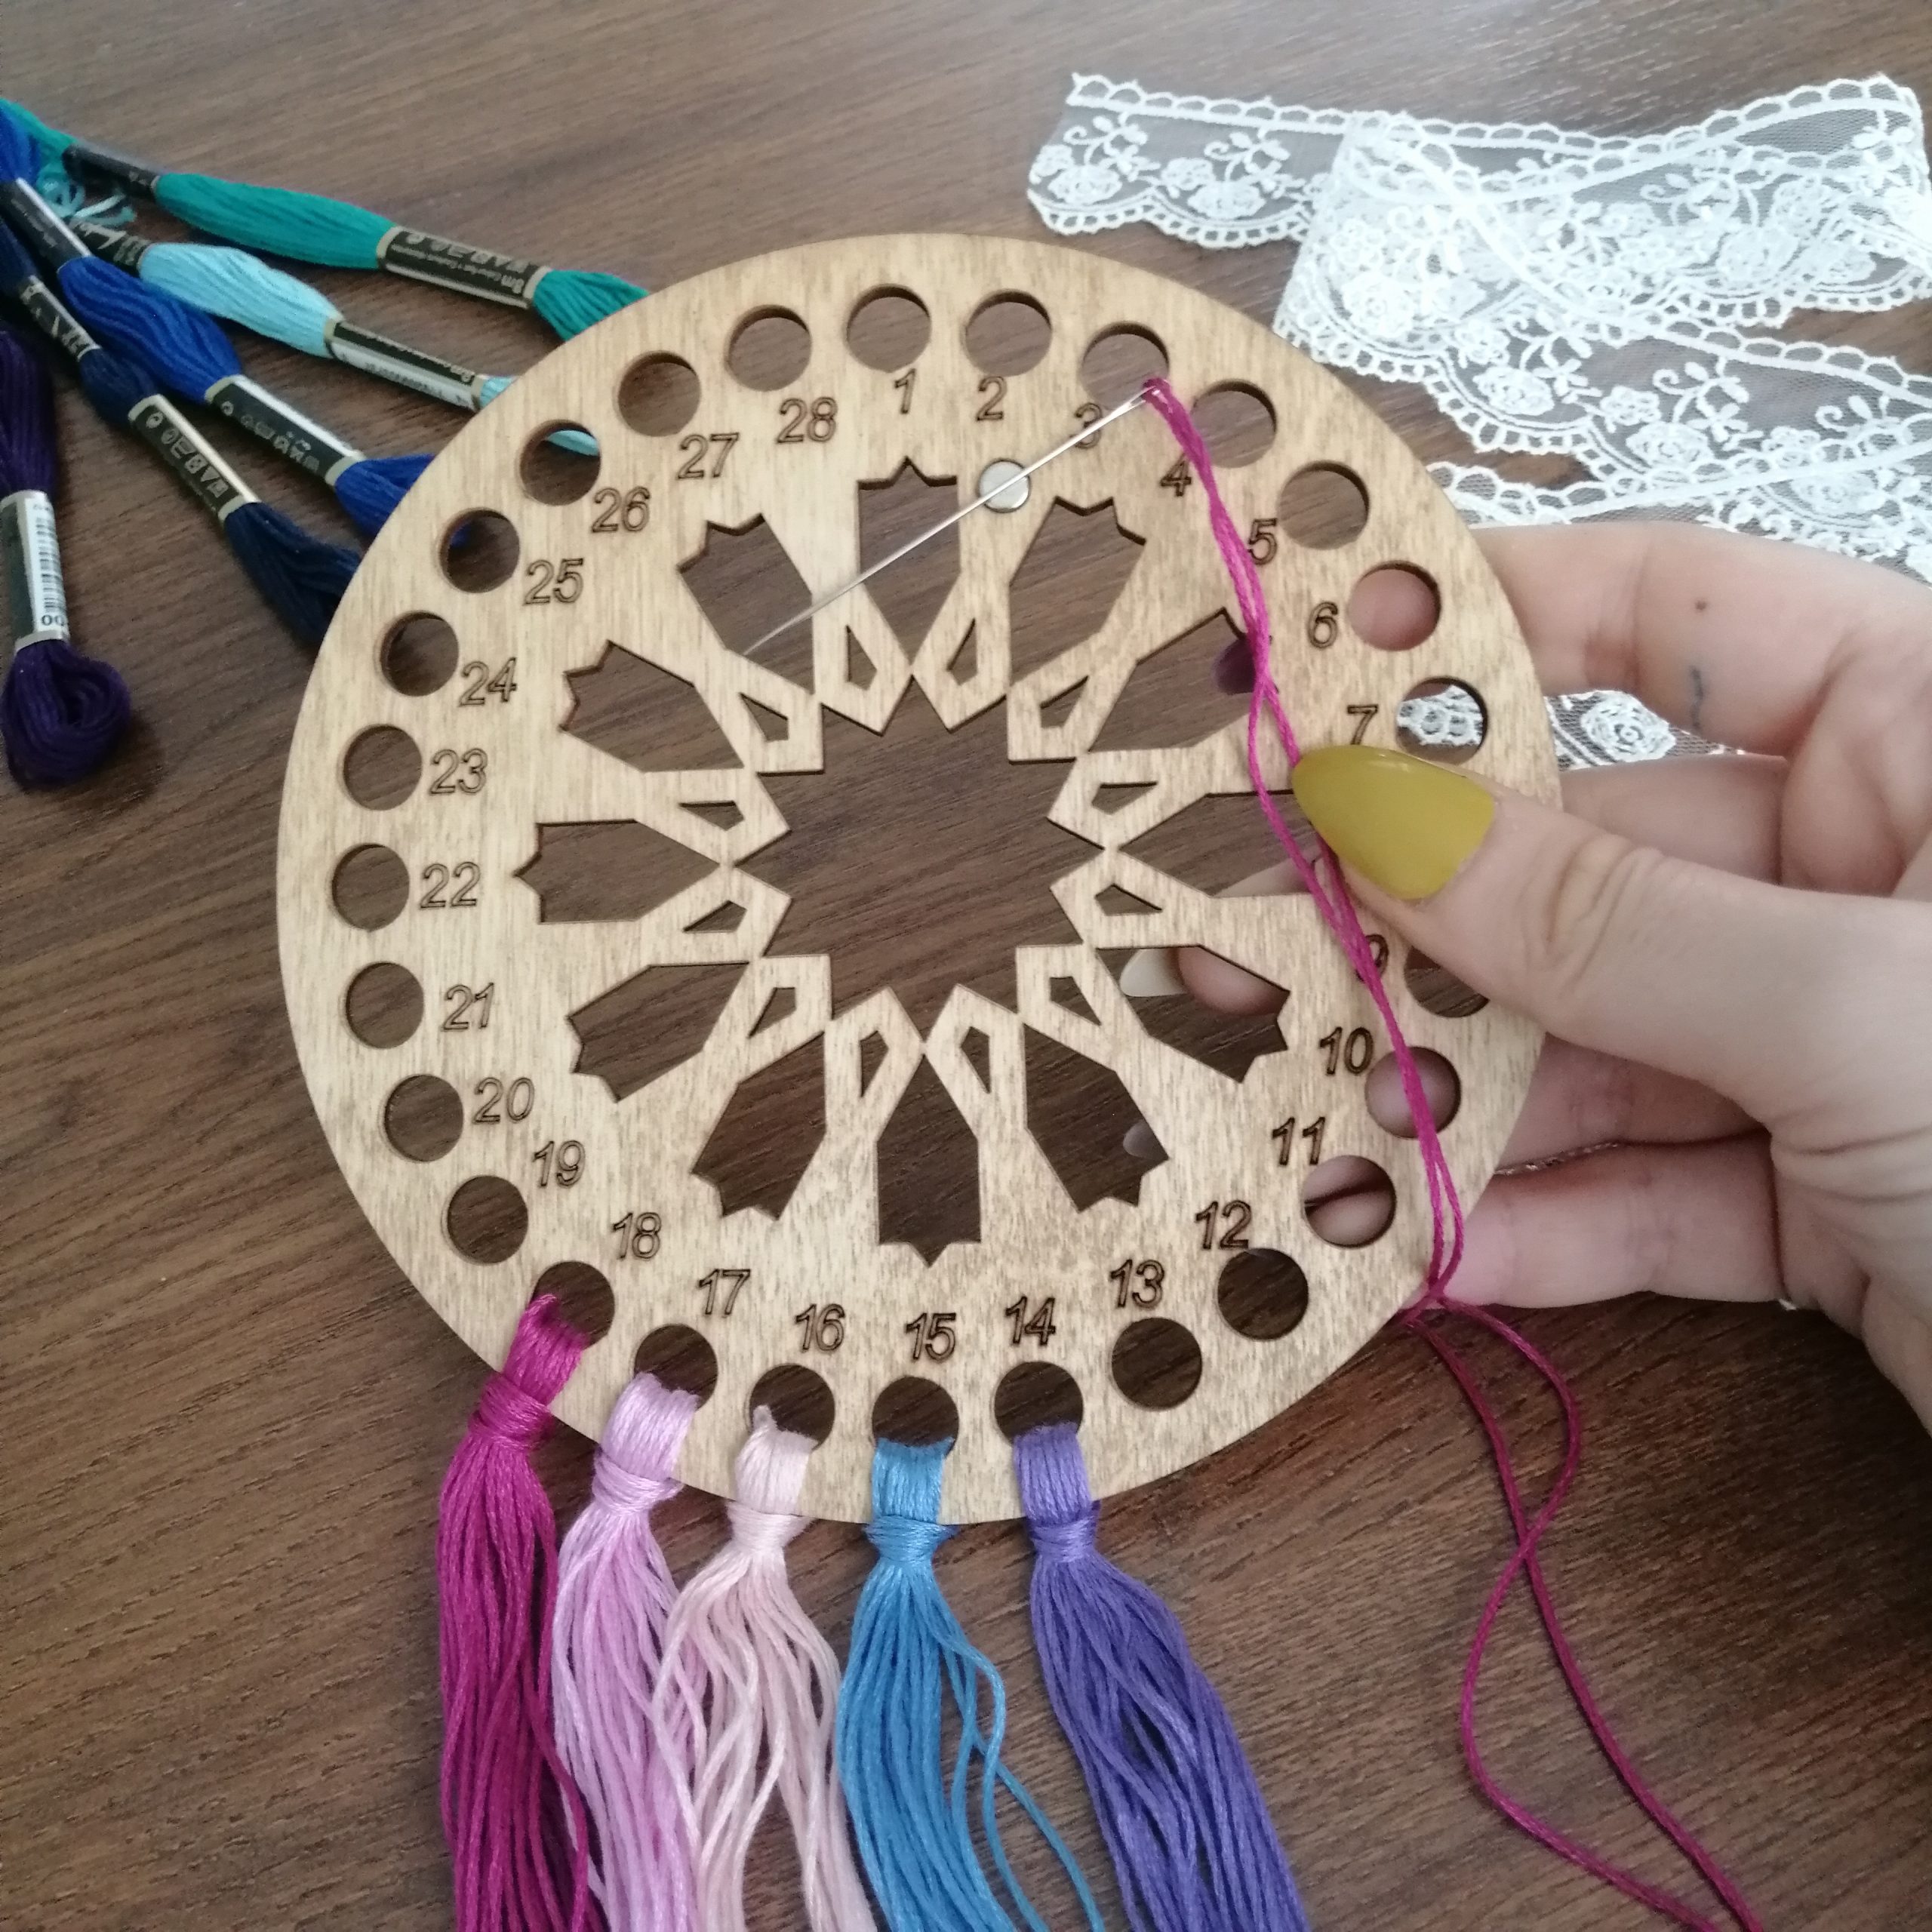 Lonjew Round Thread Sorter with Needle Holder Magnet - Wooden Art Embroidery Floss Organizer Design 1